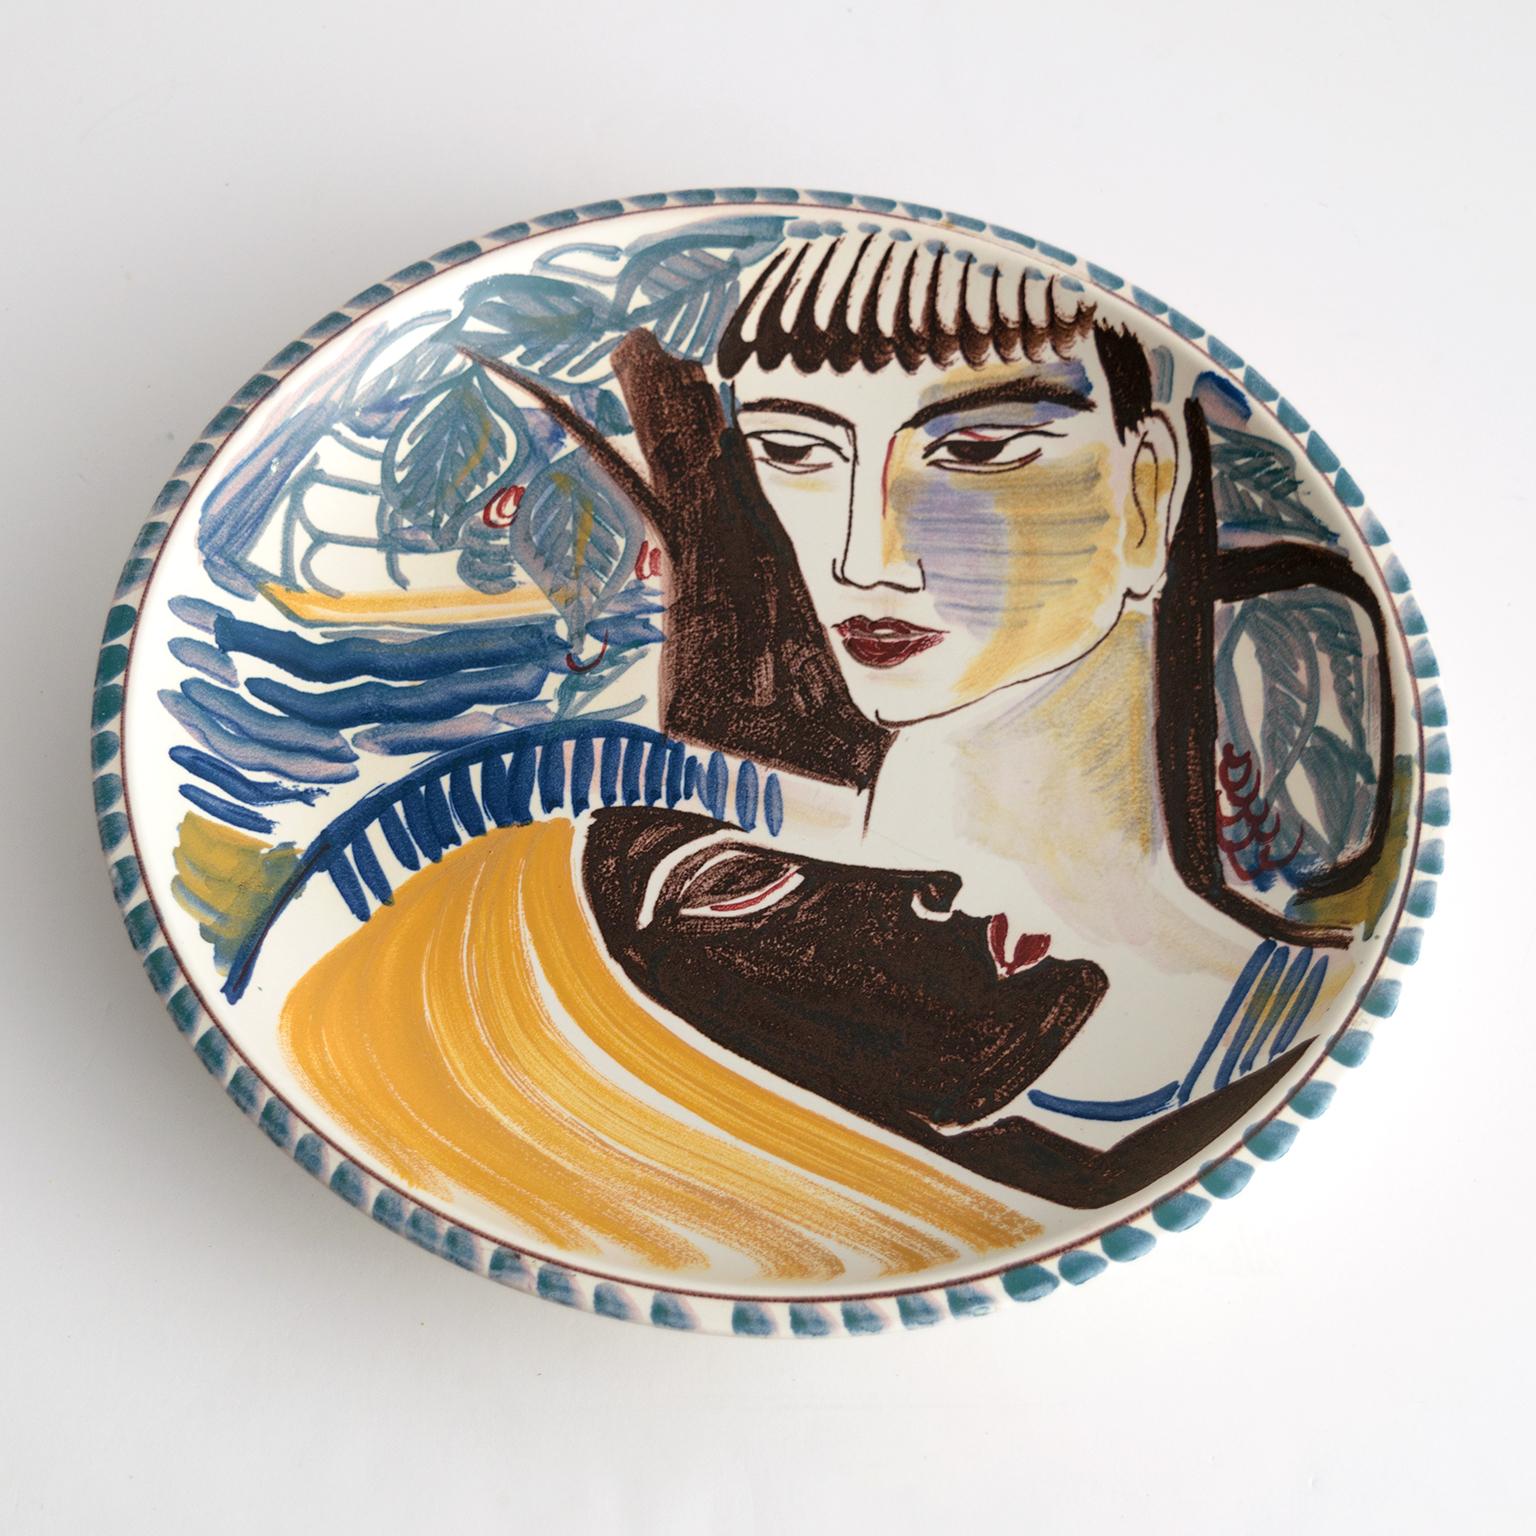 Carl-Harry Stålhane hand decorated stoneware bowl designed at Rorstrand, Sweden. The bowl depicts the faces of two women one of which is reclining. Signed and dated (1943) on the bottom. 

Measures: Diameter 15”, height 2.5”.